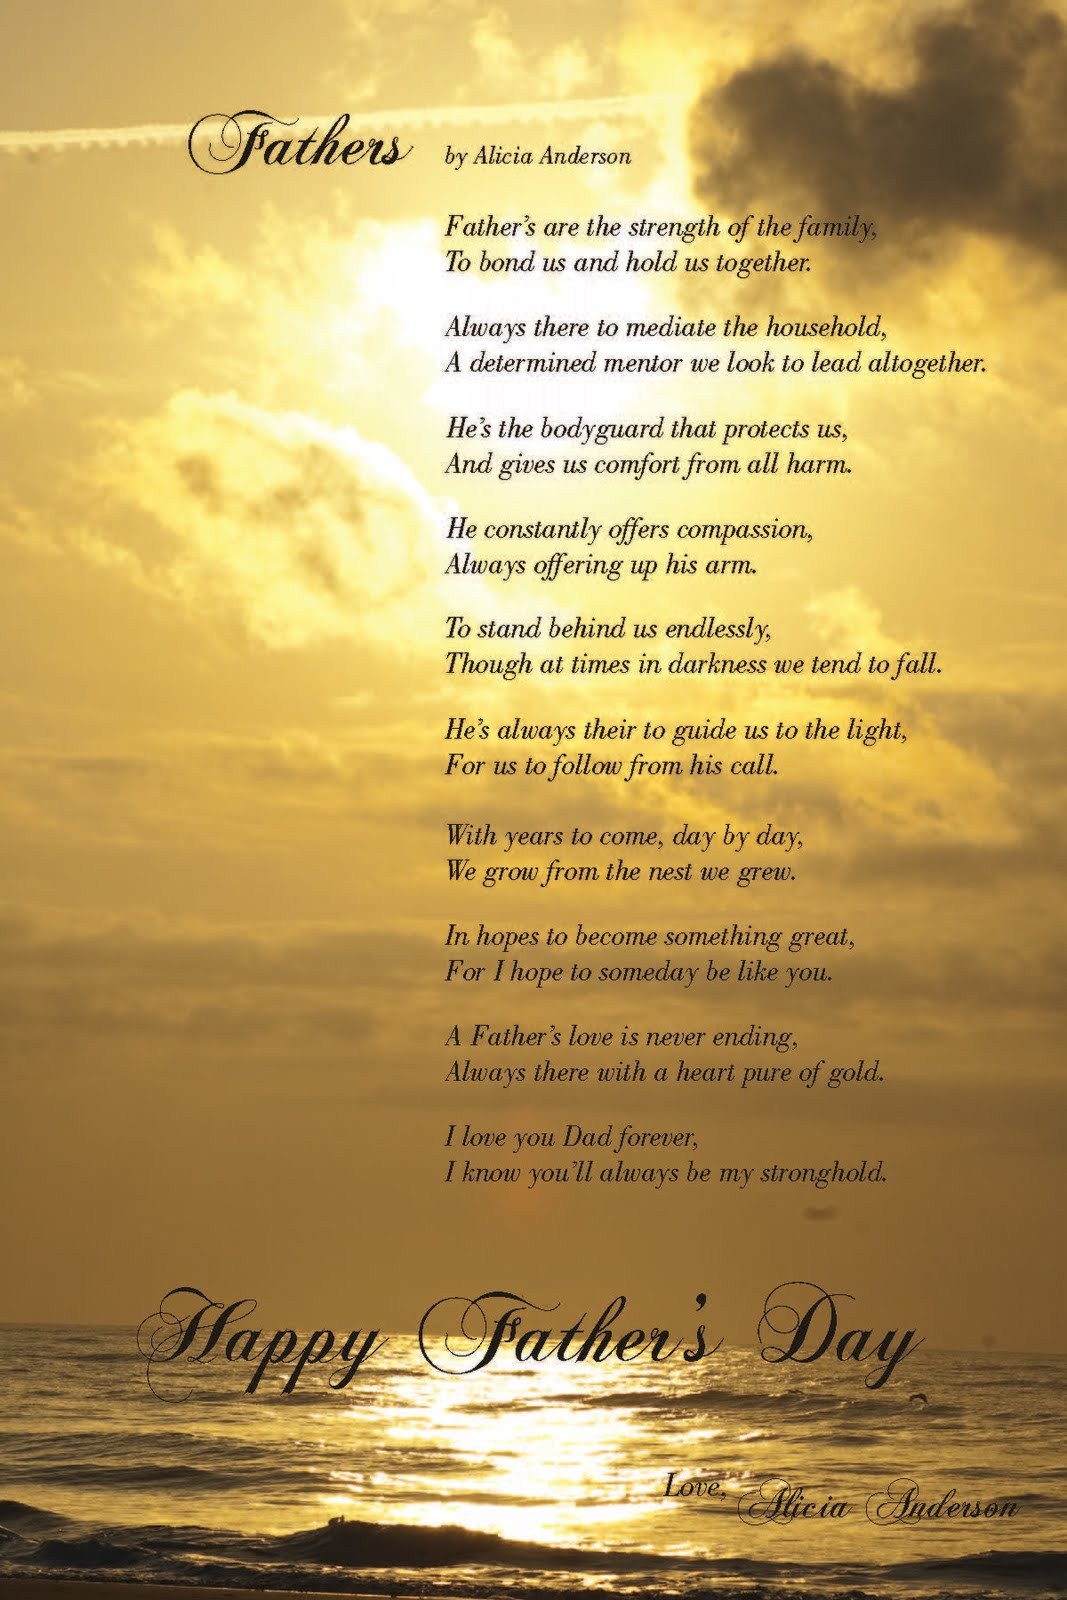 Christian fathers day poem